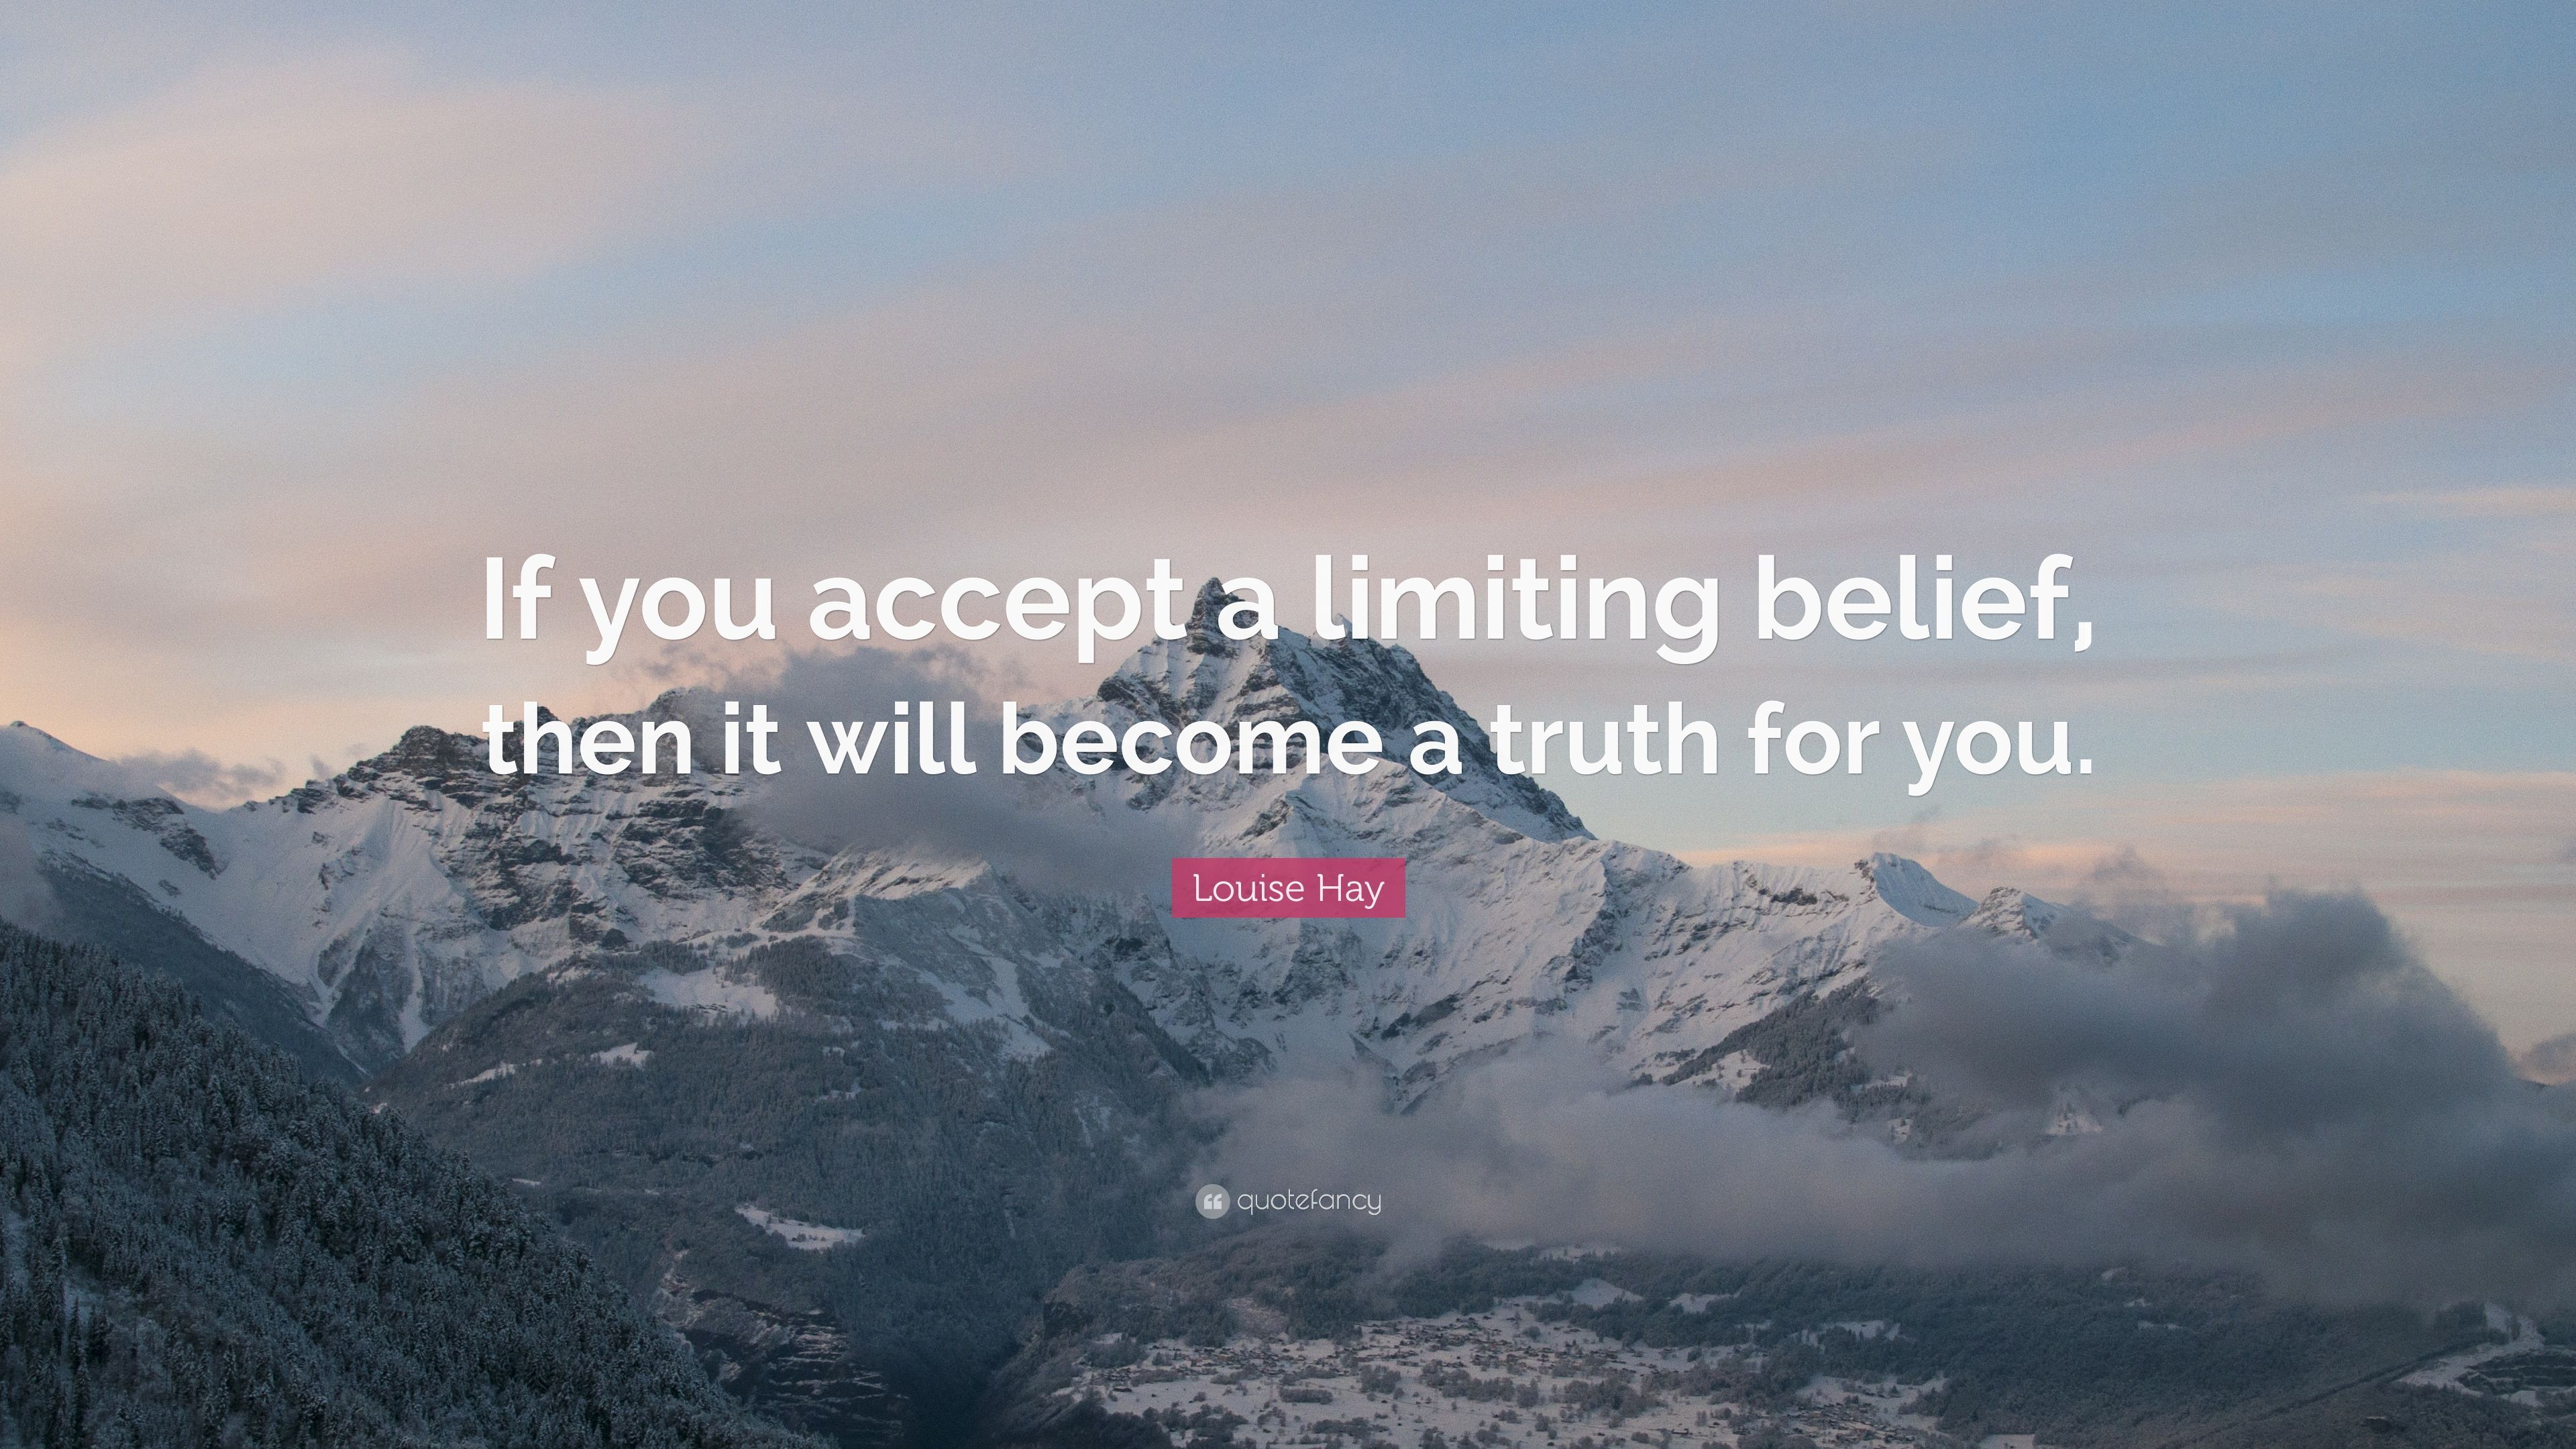 Louise Hay Quote: “If you accept a limiting belief, then it will